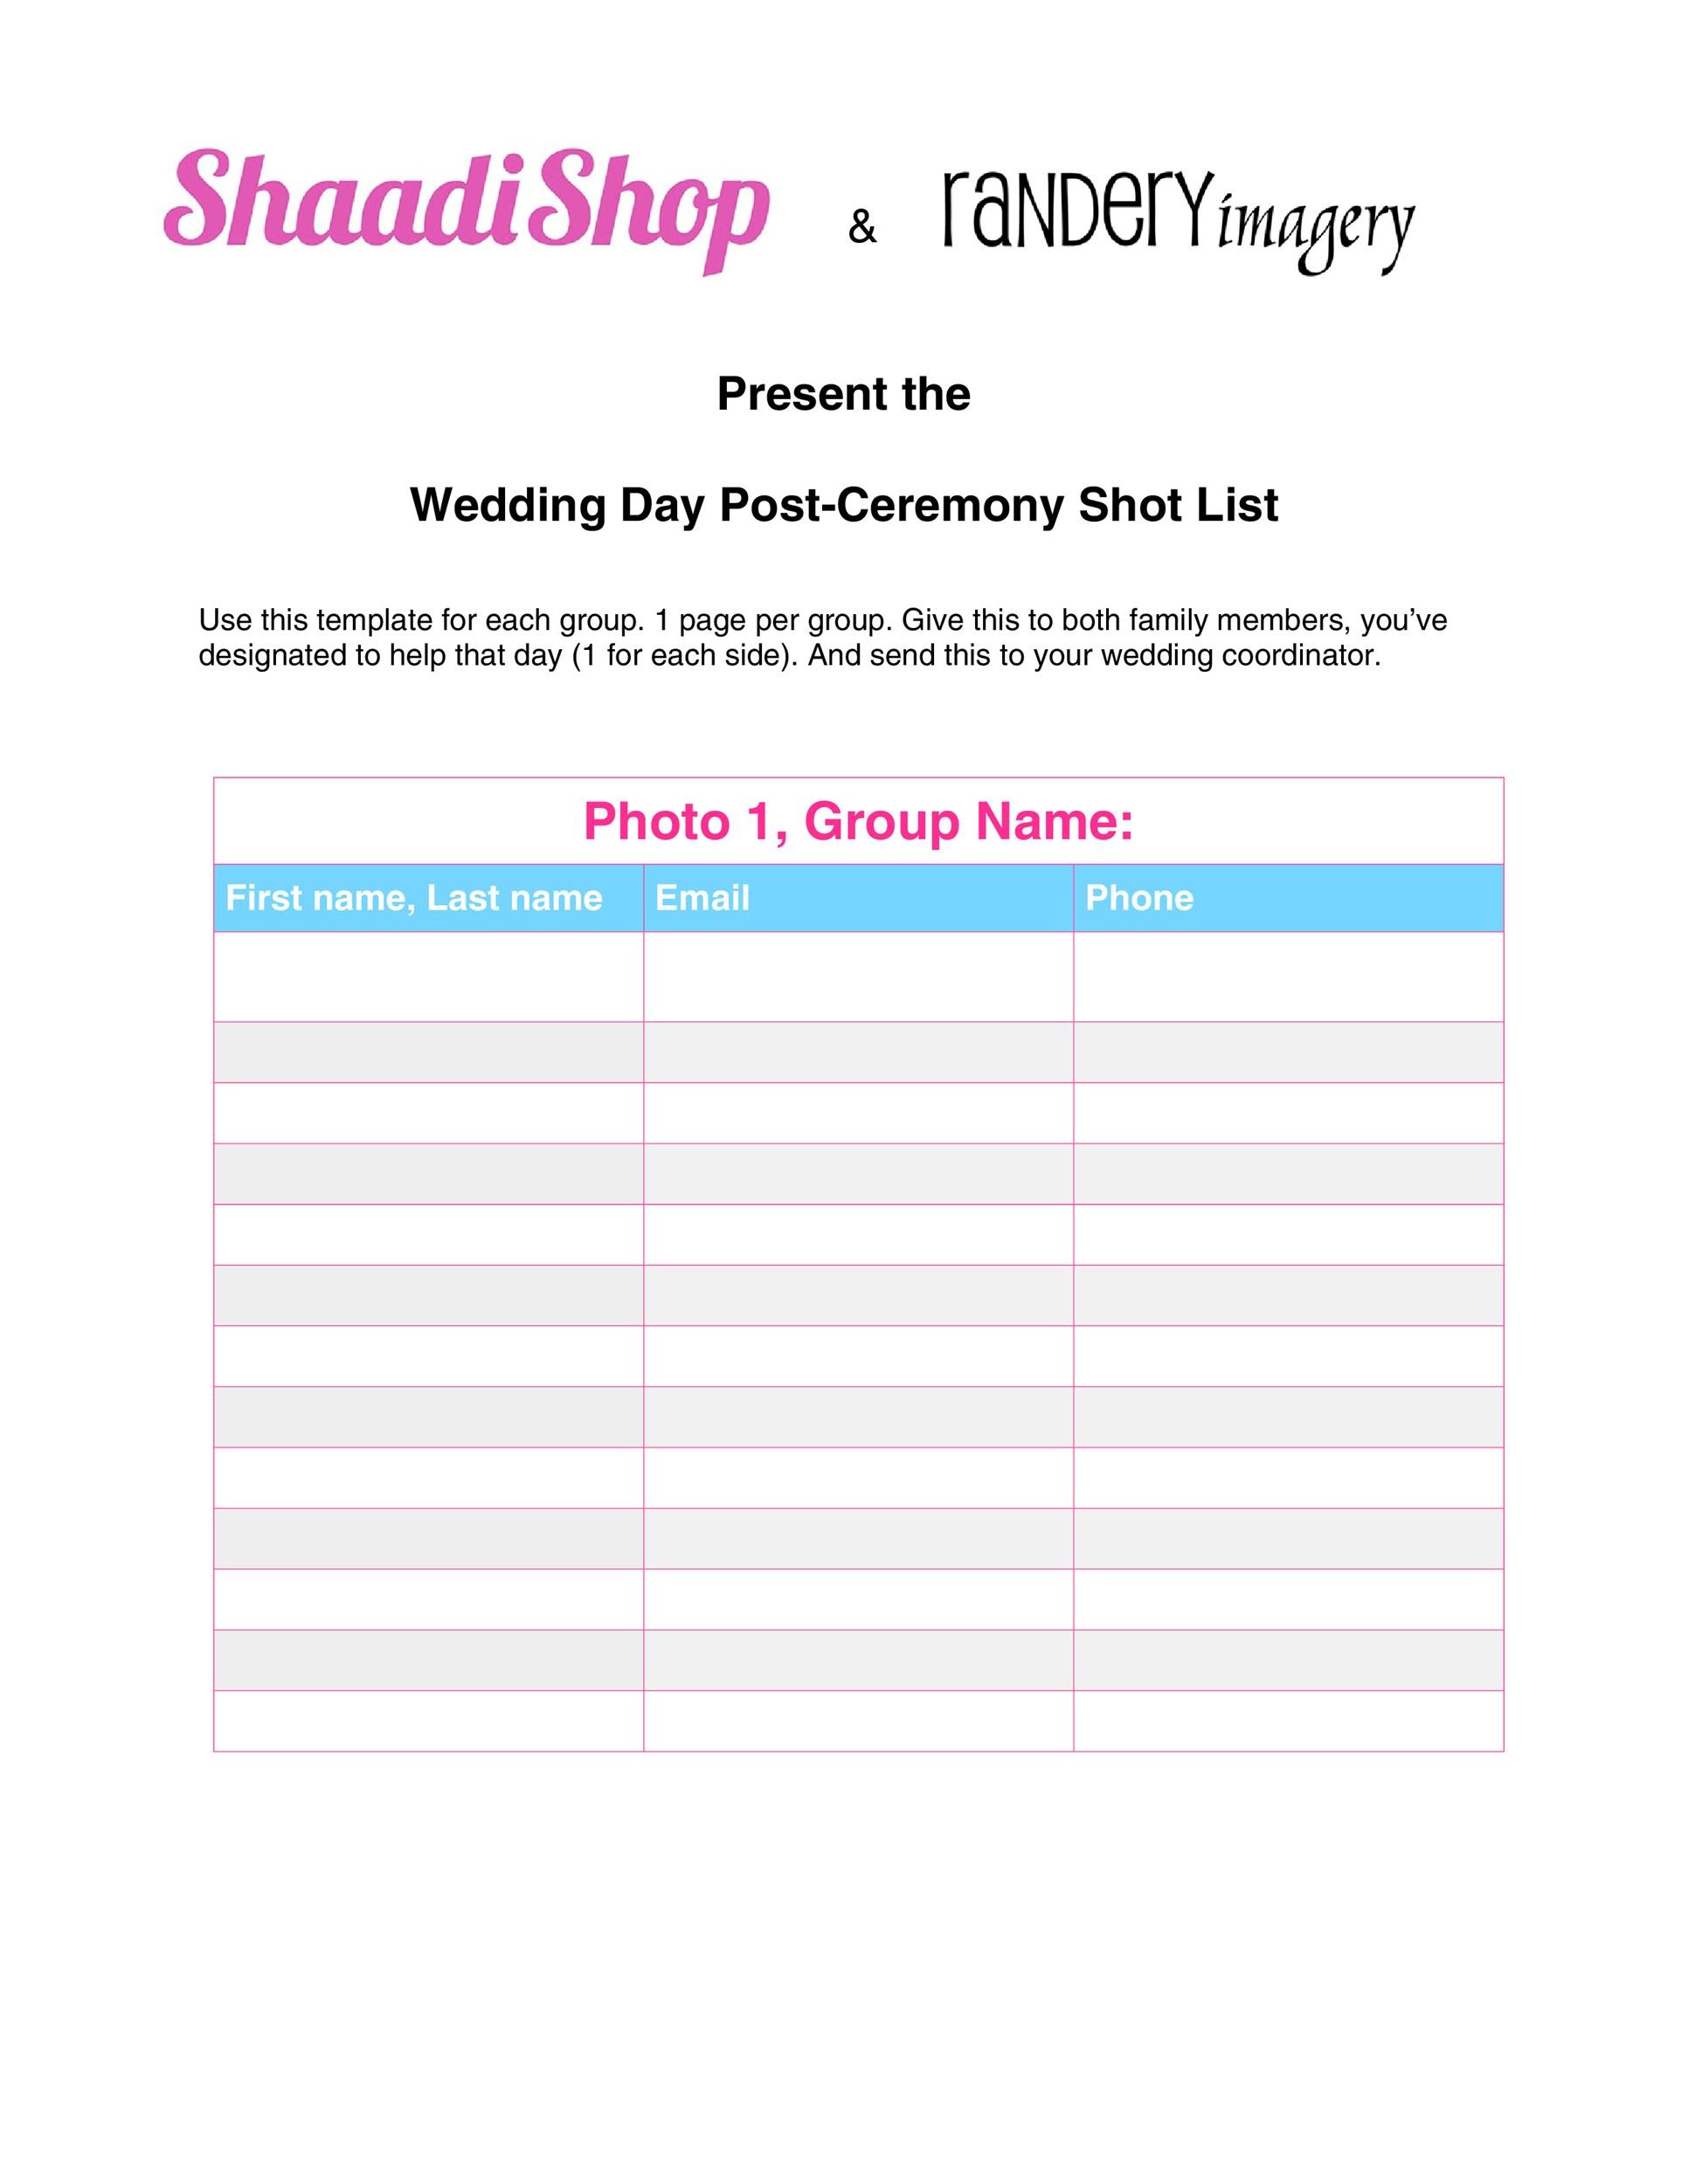 wedding-photography-shot-list-template-tutore-org-master-of-documents